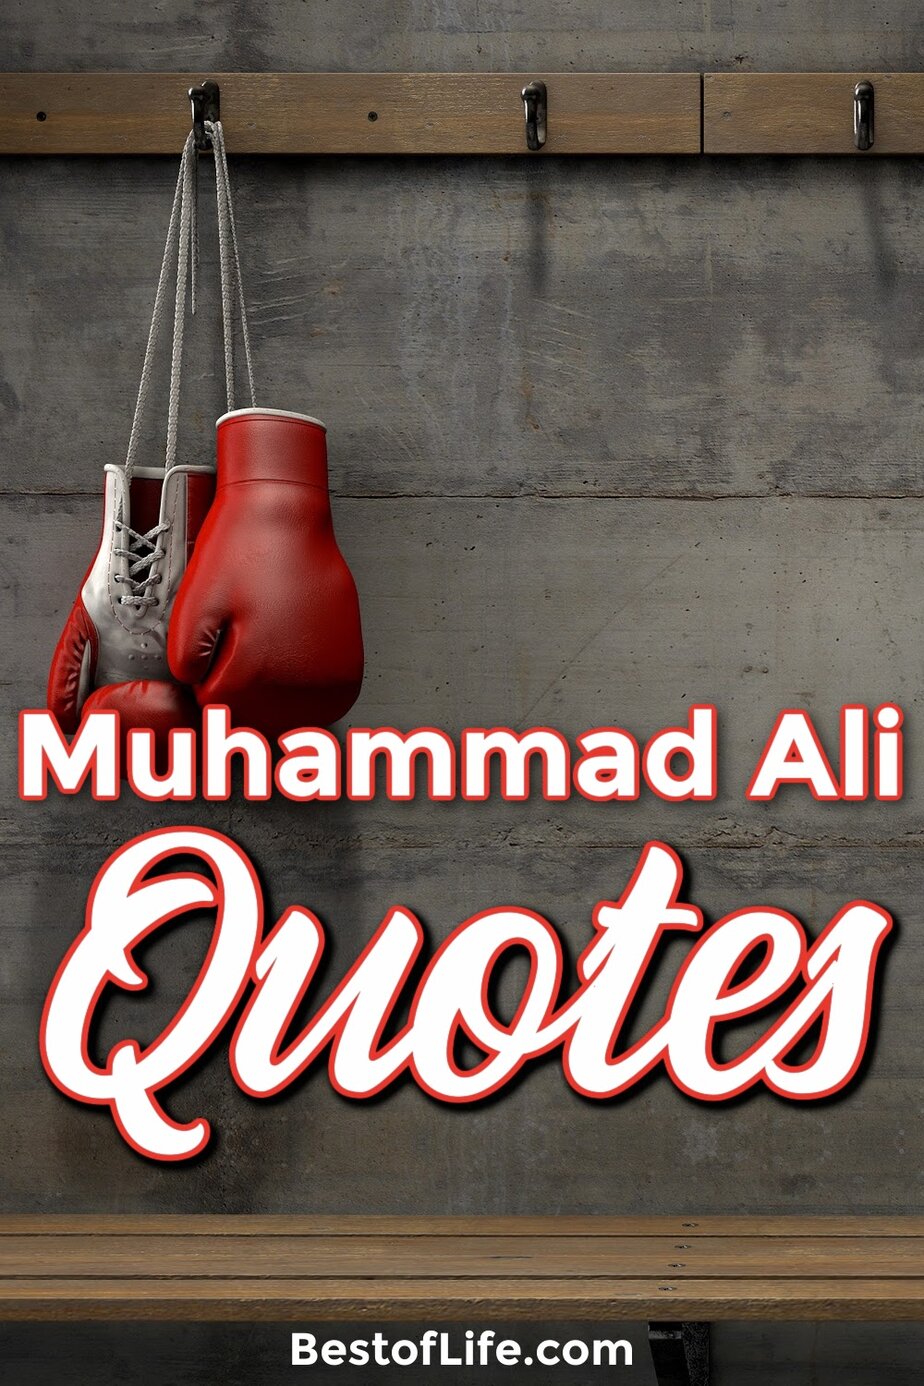 Some of the best Muhammad Ali quotes inspire us all to "Float like a butterfly and sting like a bee" in our everyday lives. Muhammad Ali Sayings | Things Muhammad Ali Said | Inspirational Quotes | Motivational Quotes | Boxing Quotes | Quotes for Competitors | Quotes for Athletes via @thebestoflife